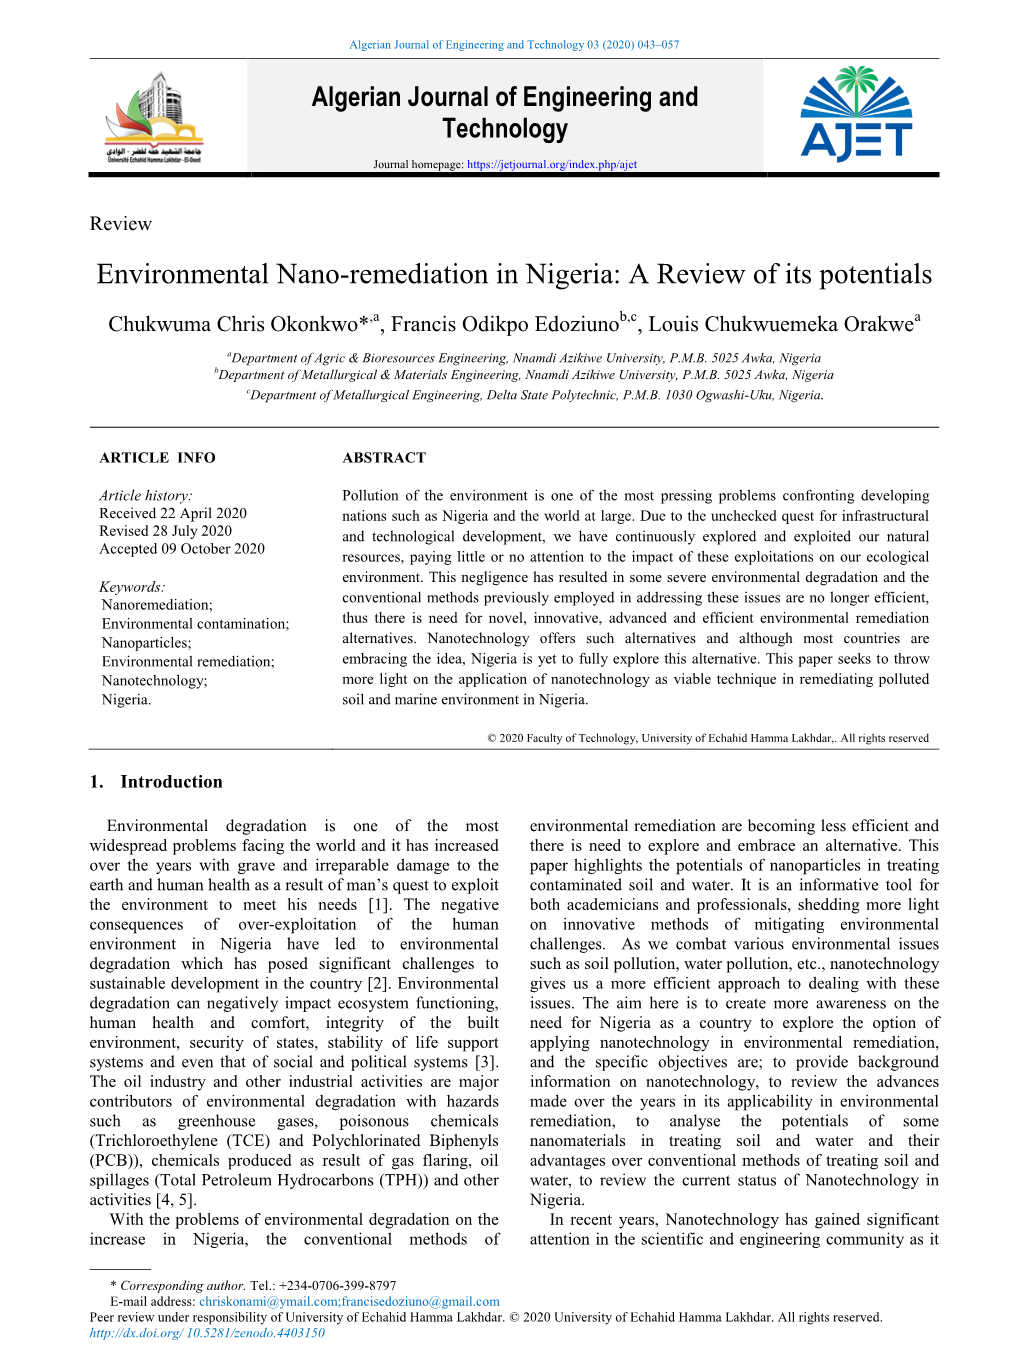 Environmental Nano-Remediation in Nigeria: a Review of Its Potentials